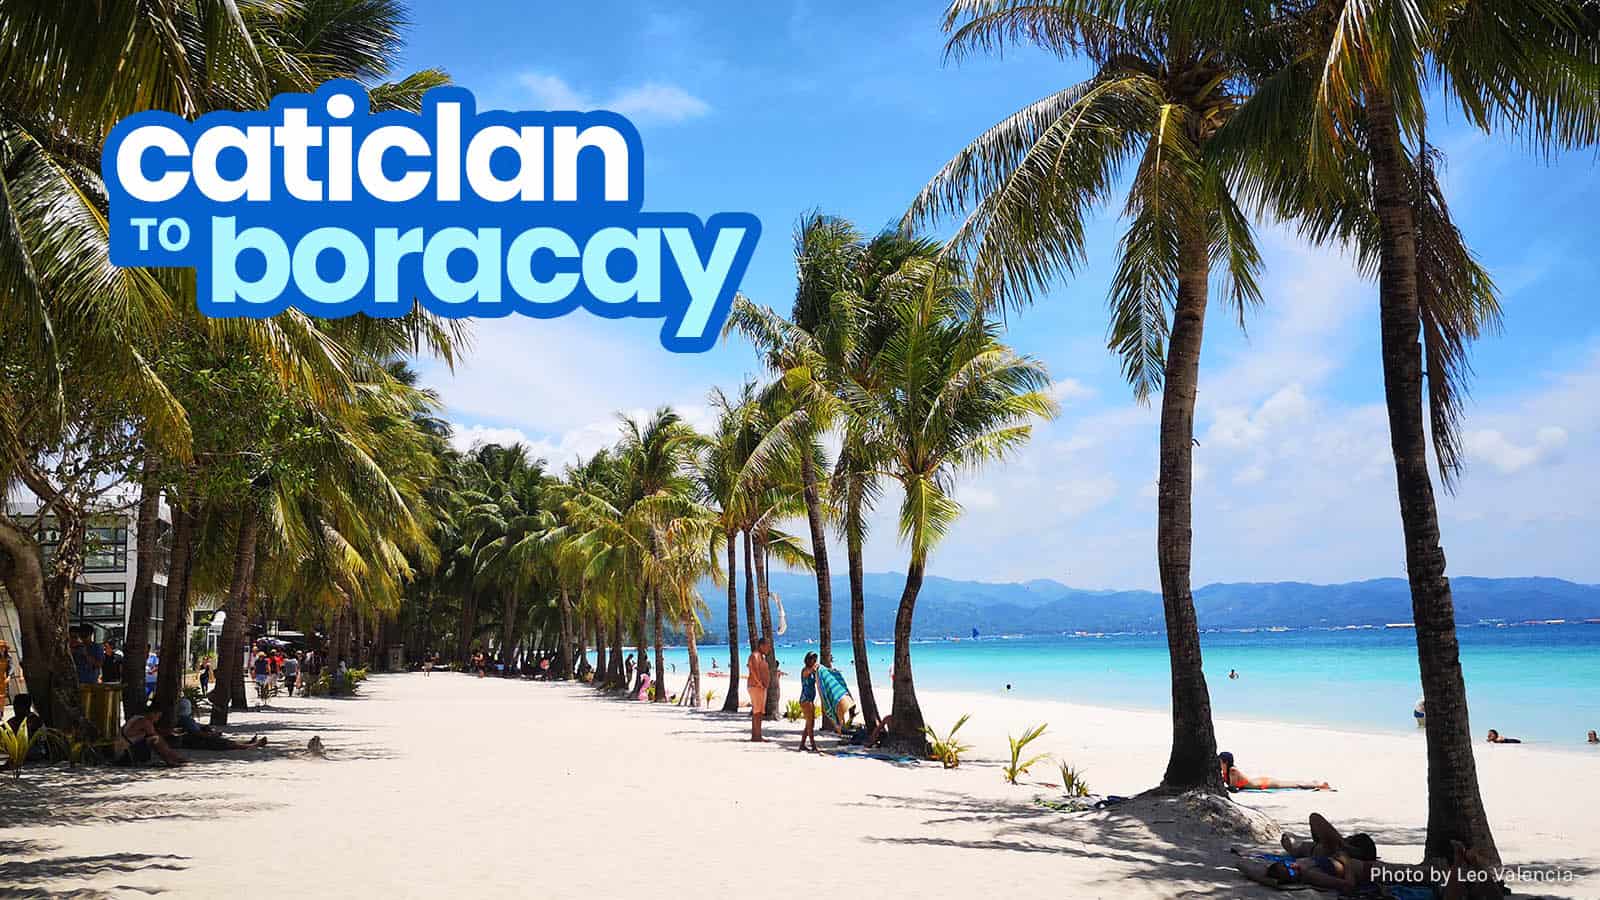 How to Get from CATICLAN AIRPORT to BORACAY